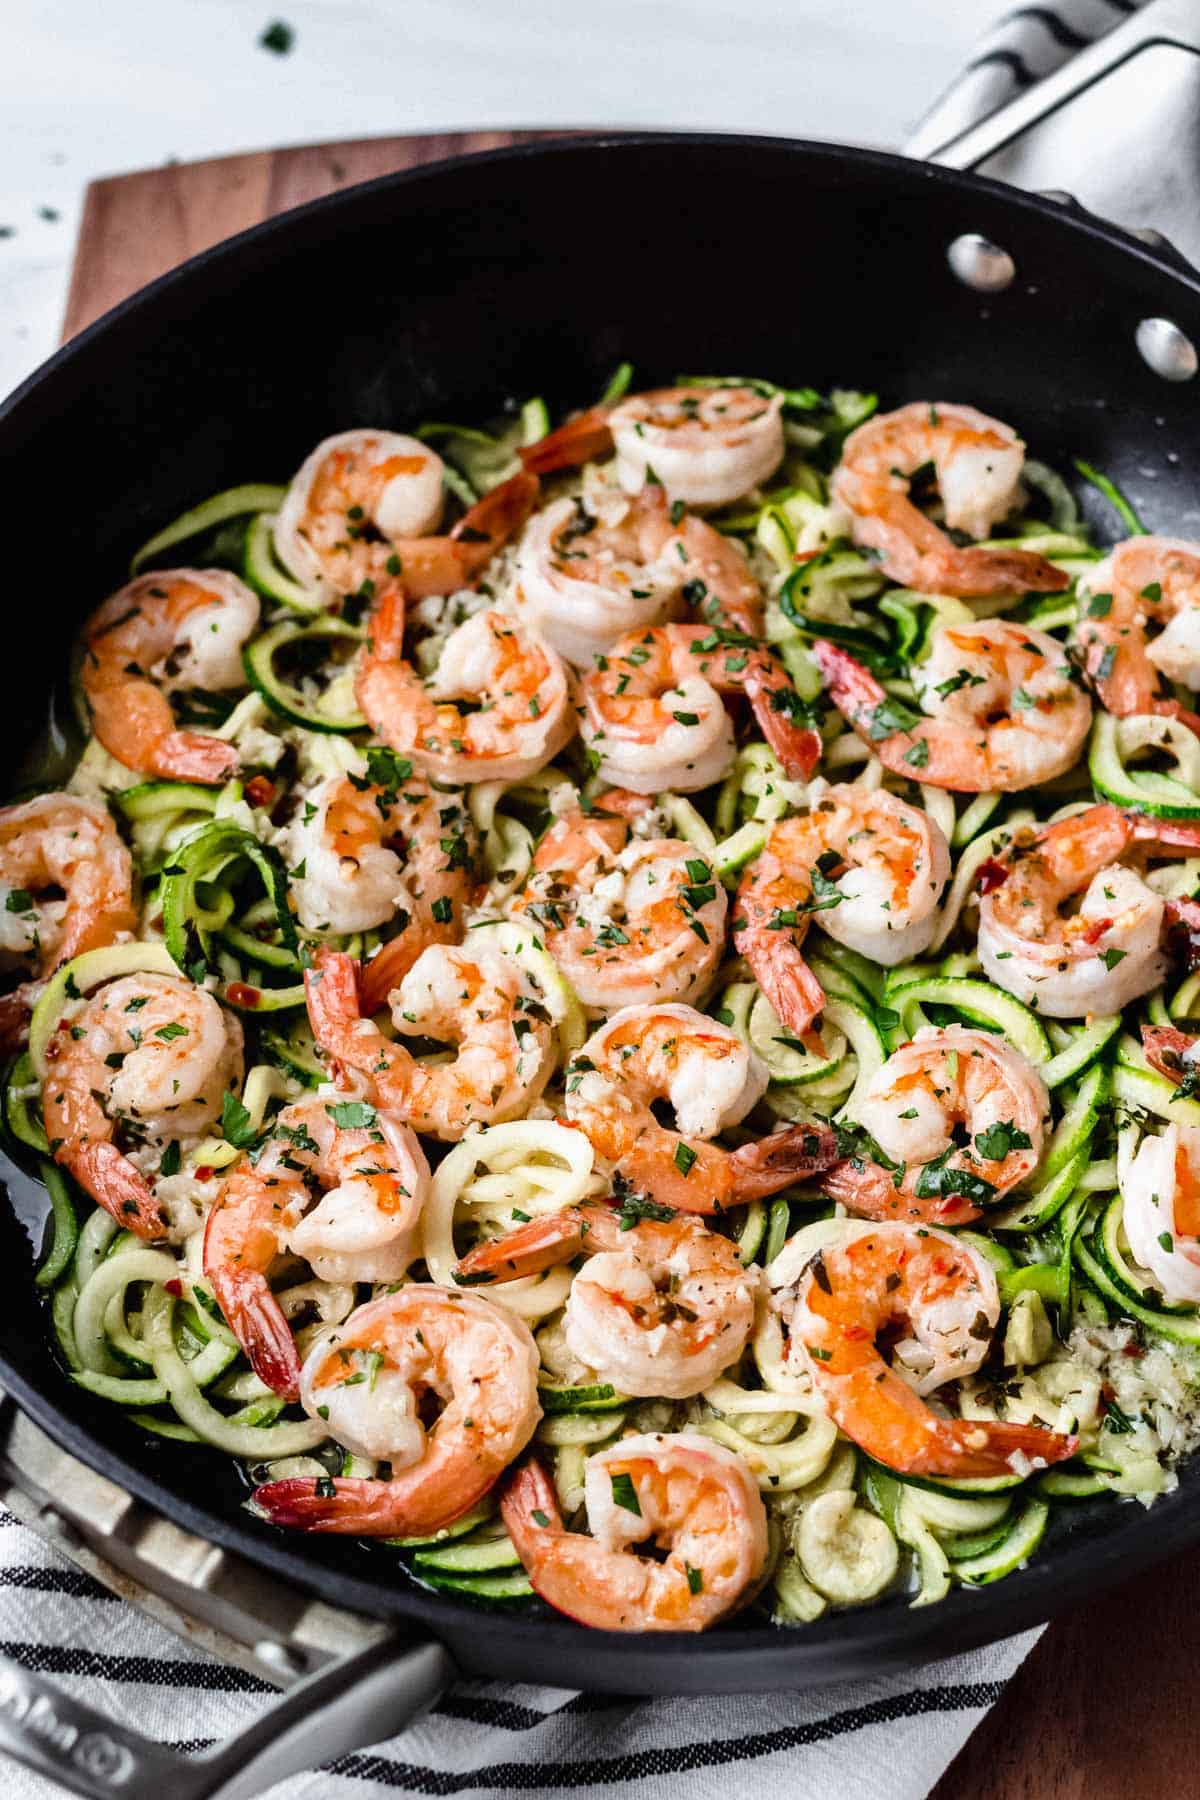 Skillet with Keto Shrimp Scampi and zoodles on a white striped towel on a wood background